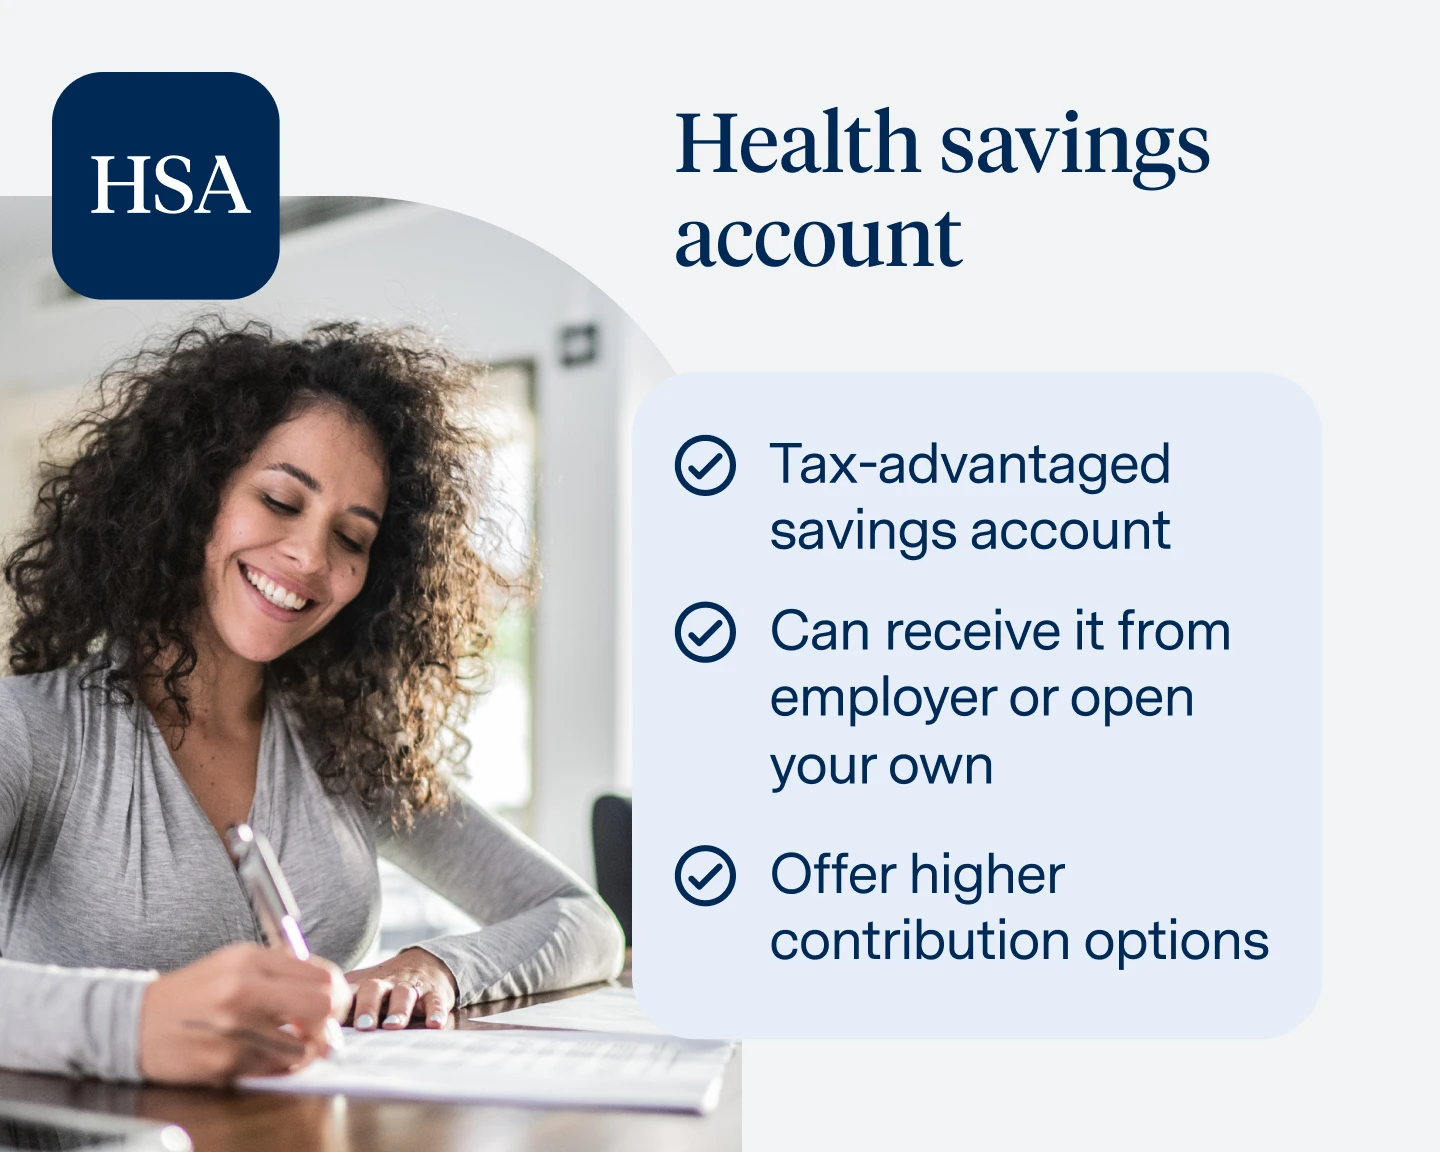 A Health savings account (HSA) is a tax-advantaged savings account linked to a high-deductible health plan. It enables pre-tax contributions for qualified medical and dental expenses, offers tax savings, and personalized approach to healthcare financing.